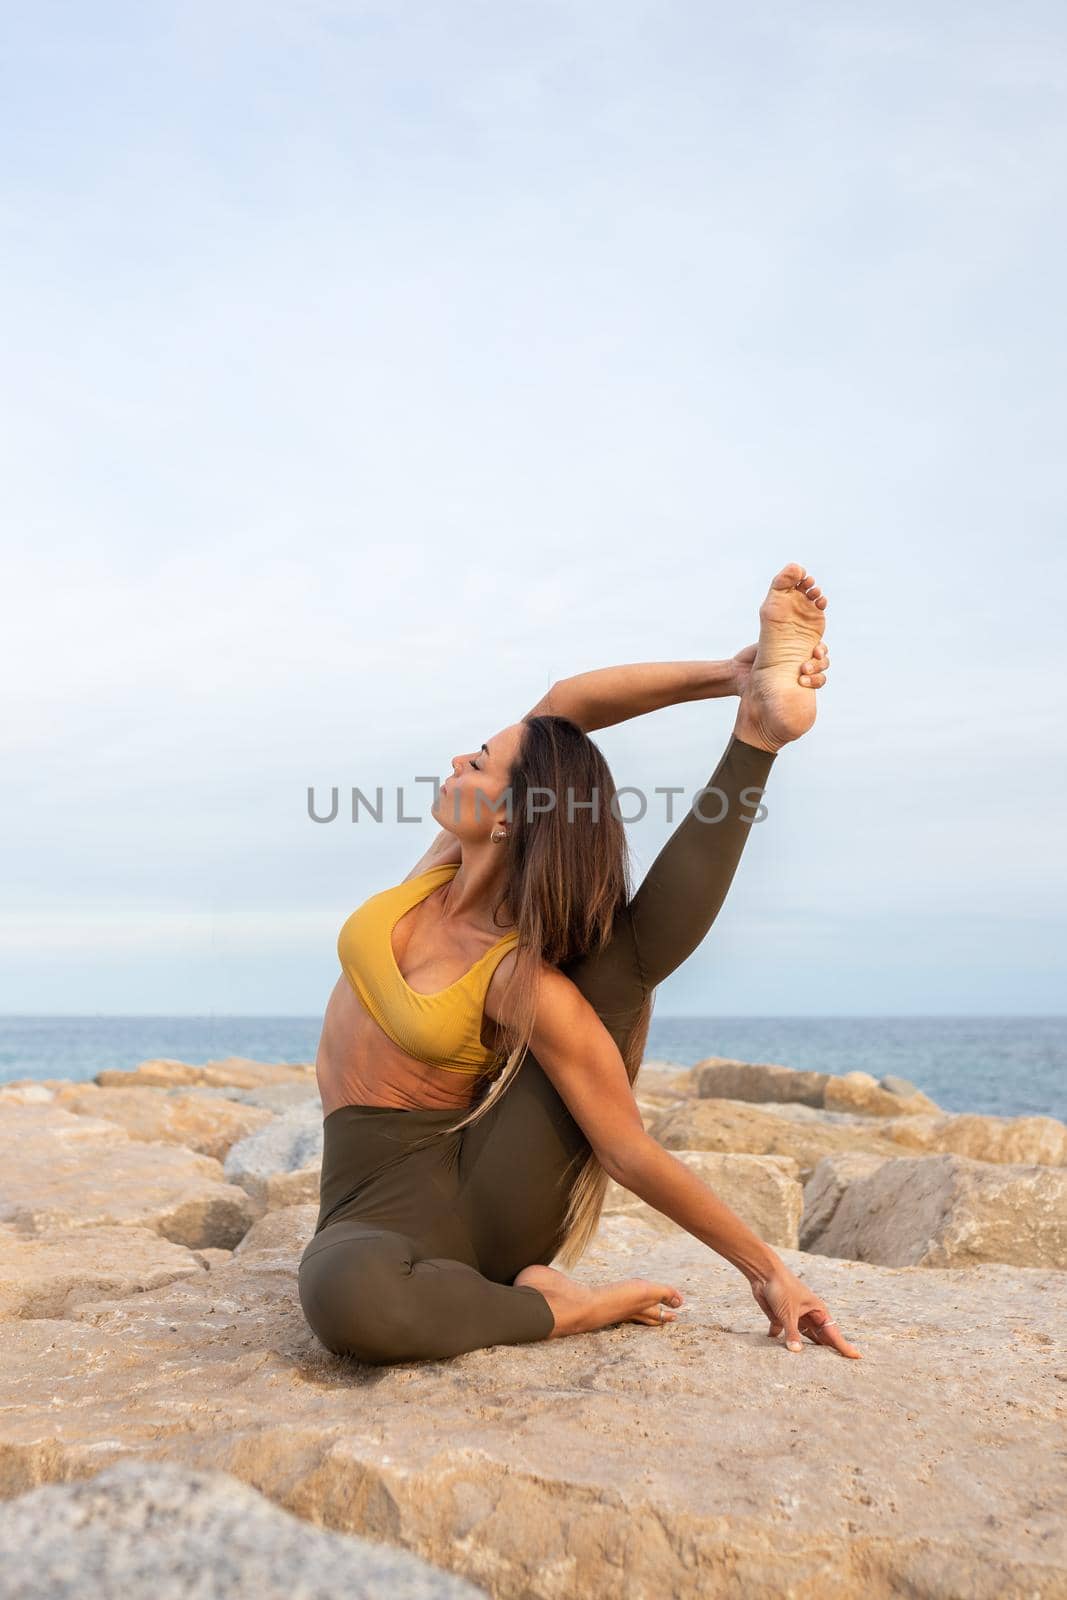 Flexible young woman doing Parivritta Kraunchasana yoga pose on a rock near the sea. Copy space. Vertical image. Healthy and active lifestyle concept.